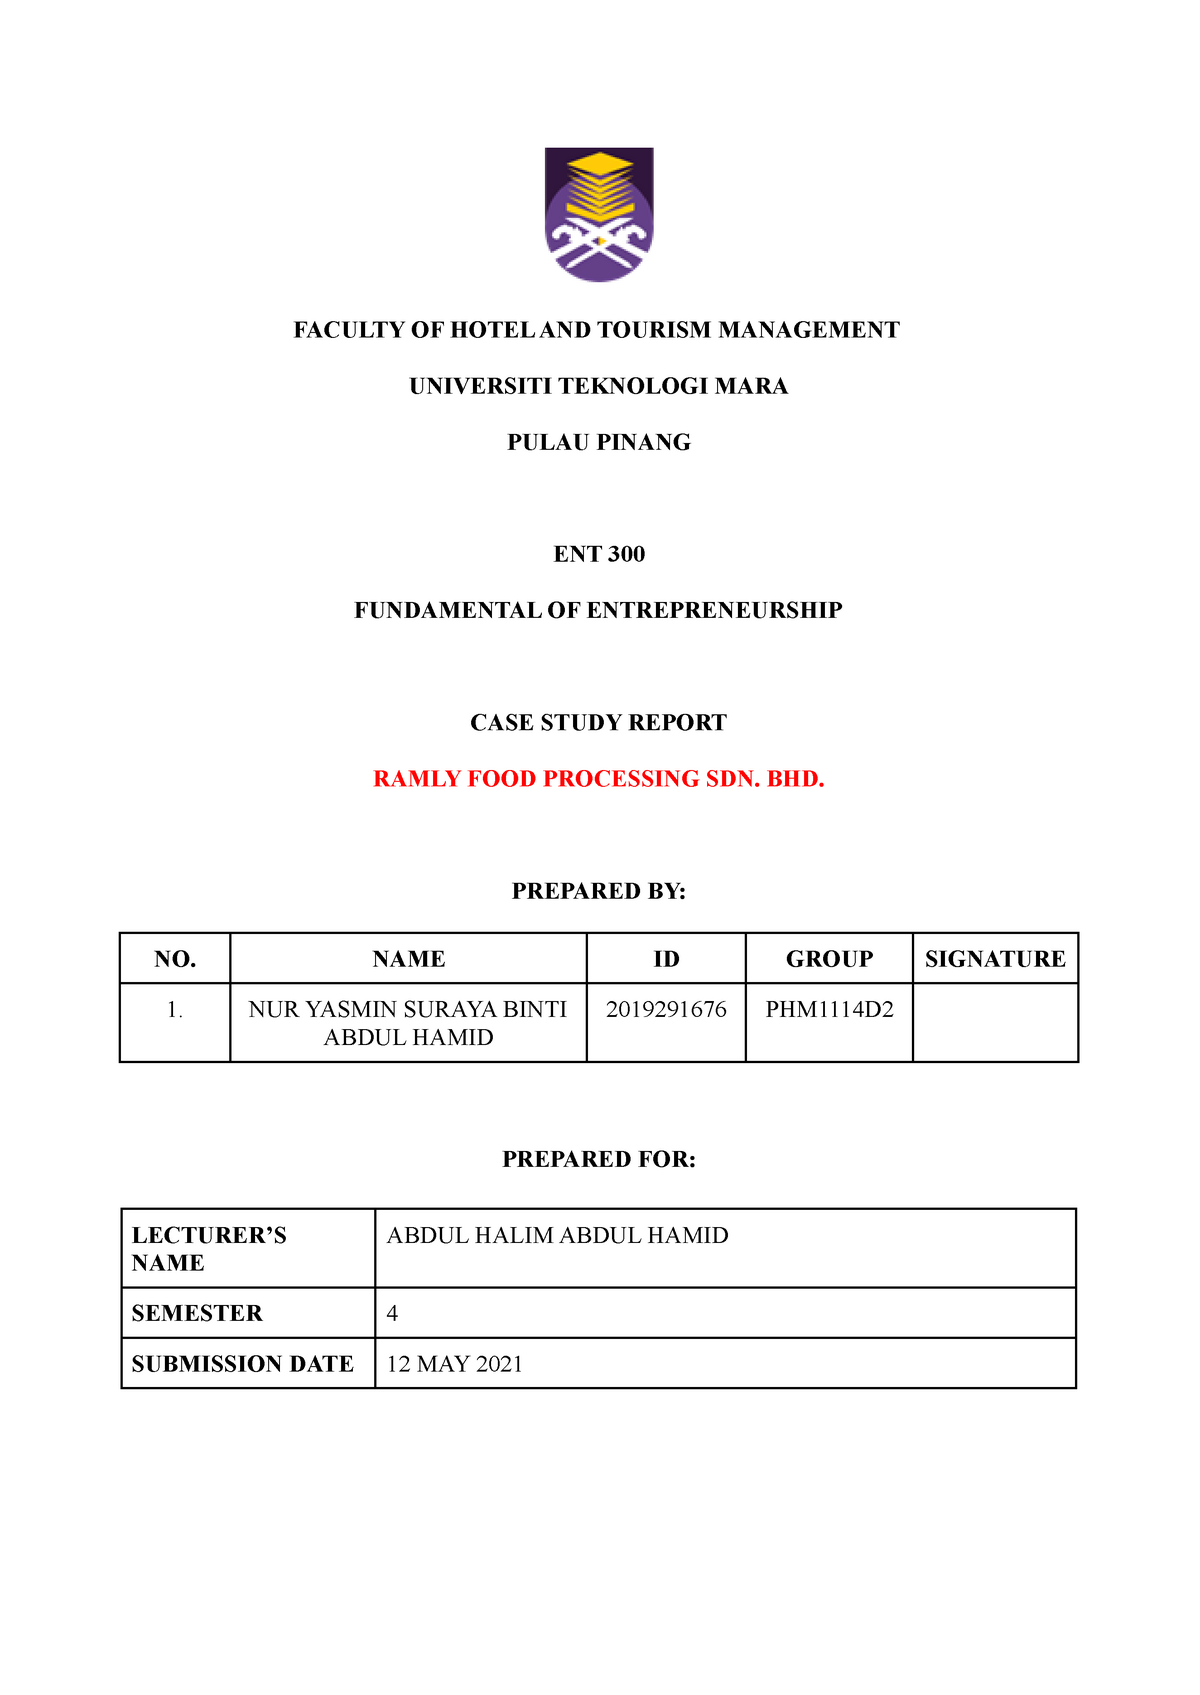 Case Study ENT 300 - FACULTY OF HOTEL AND TOURISM MANAGEMENT UNIVERSITI